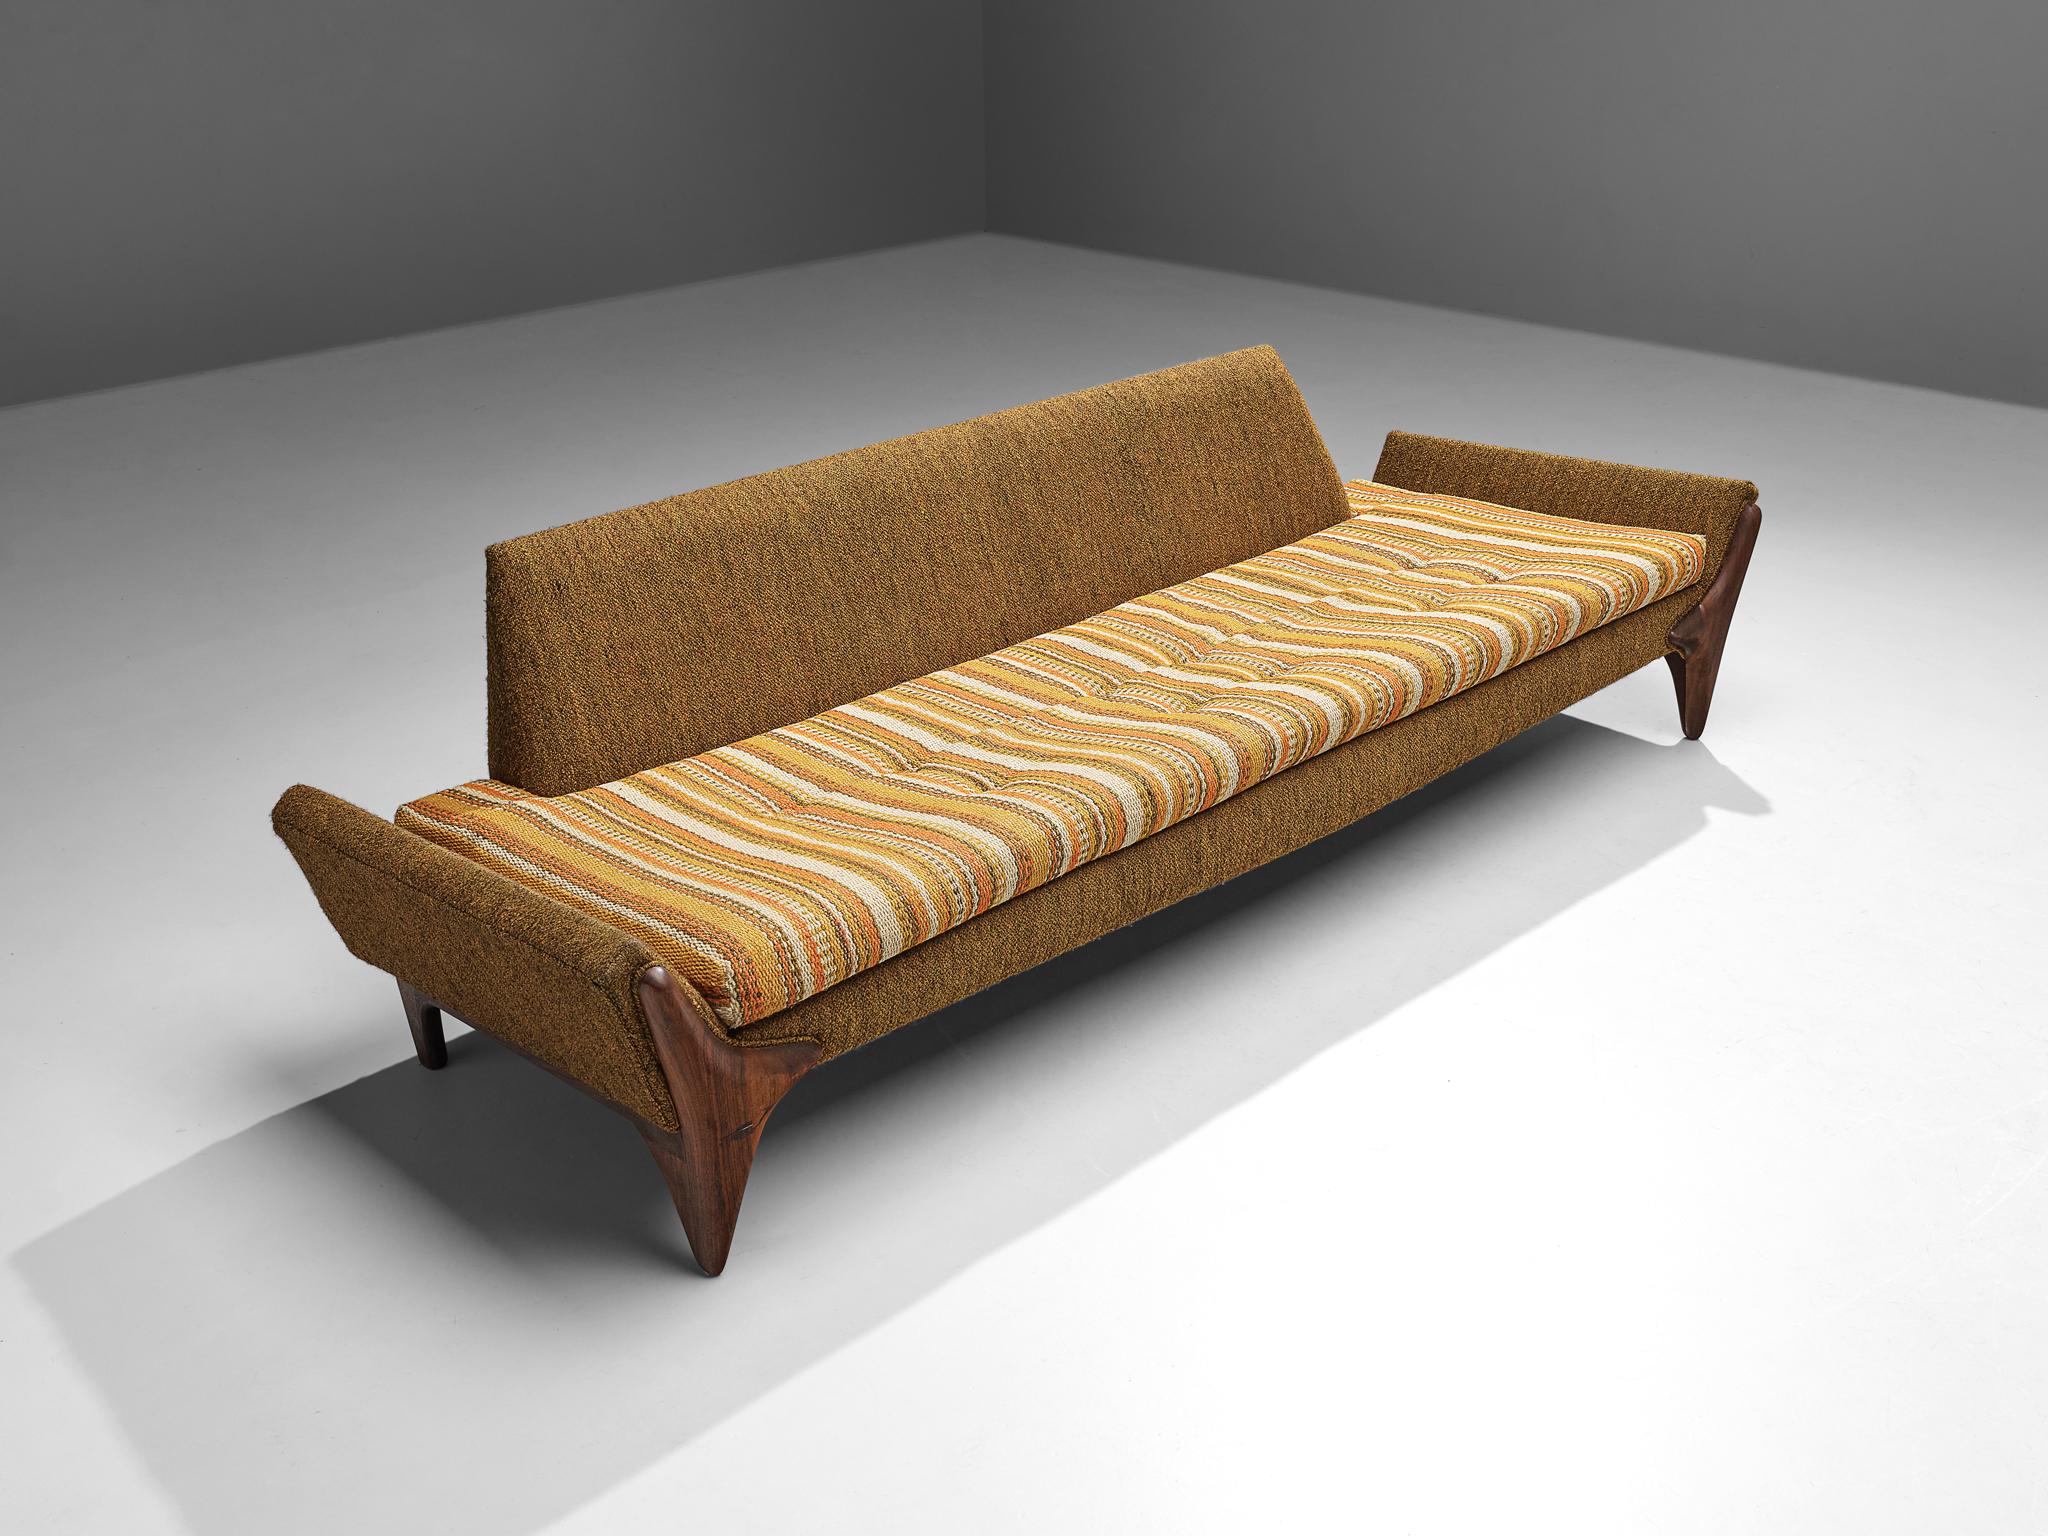 Adrian Pearsall, sofa, American walnut, fabric, United States, 1960s.

This beautifully shaped sofa designed by Adrian Pearsall is characterized by a solid construction, featuring clear lines and sharp shapes. The boomerang shaped legs uplift the